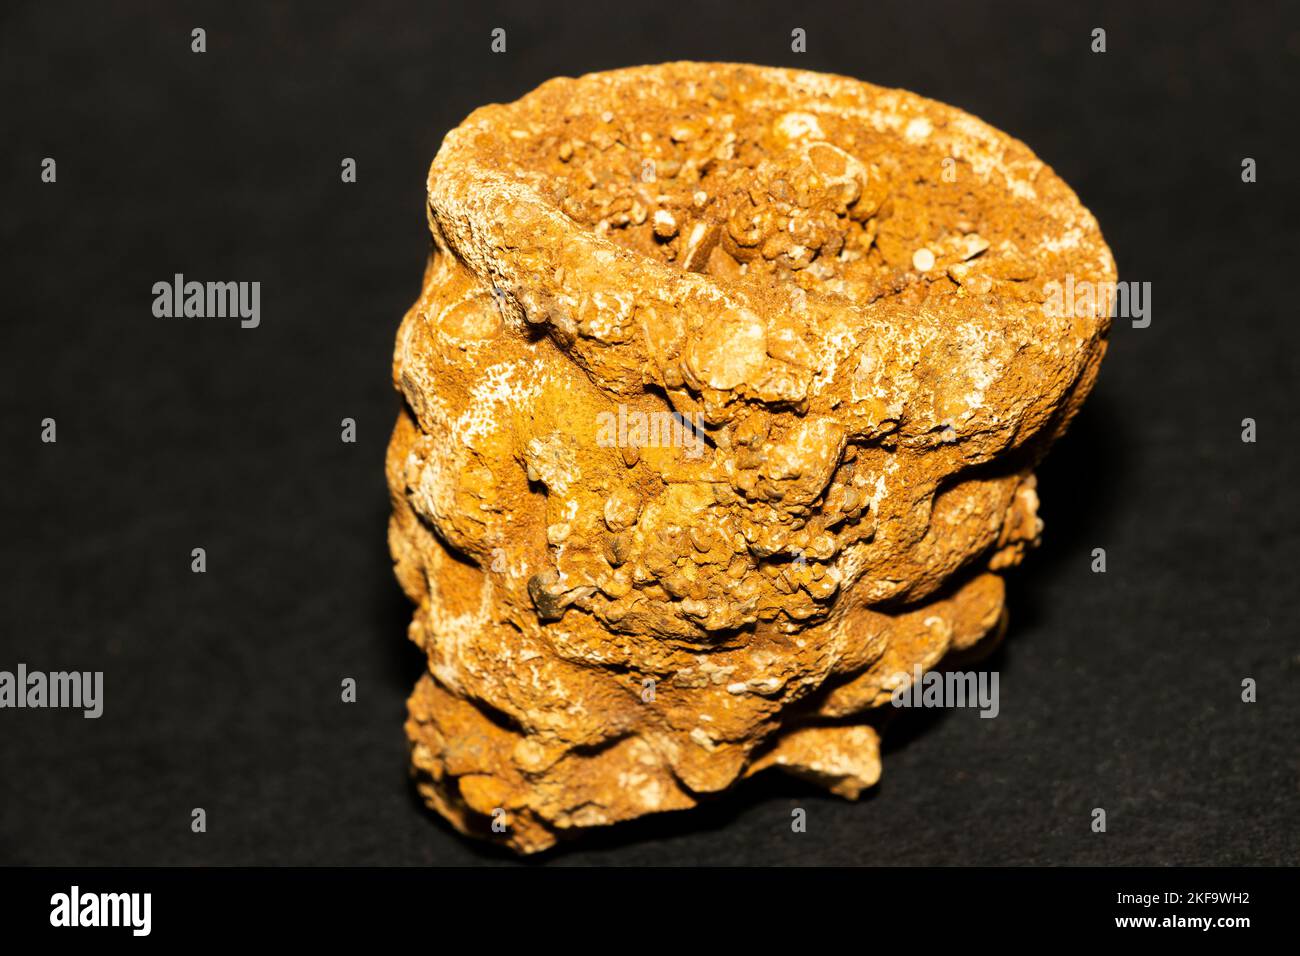 The fossil of an ancient sponge that thrived in the tropical shallow seas during the Cretaceous period 115 million years ago. Stock Photo